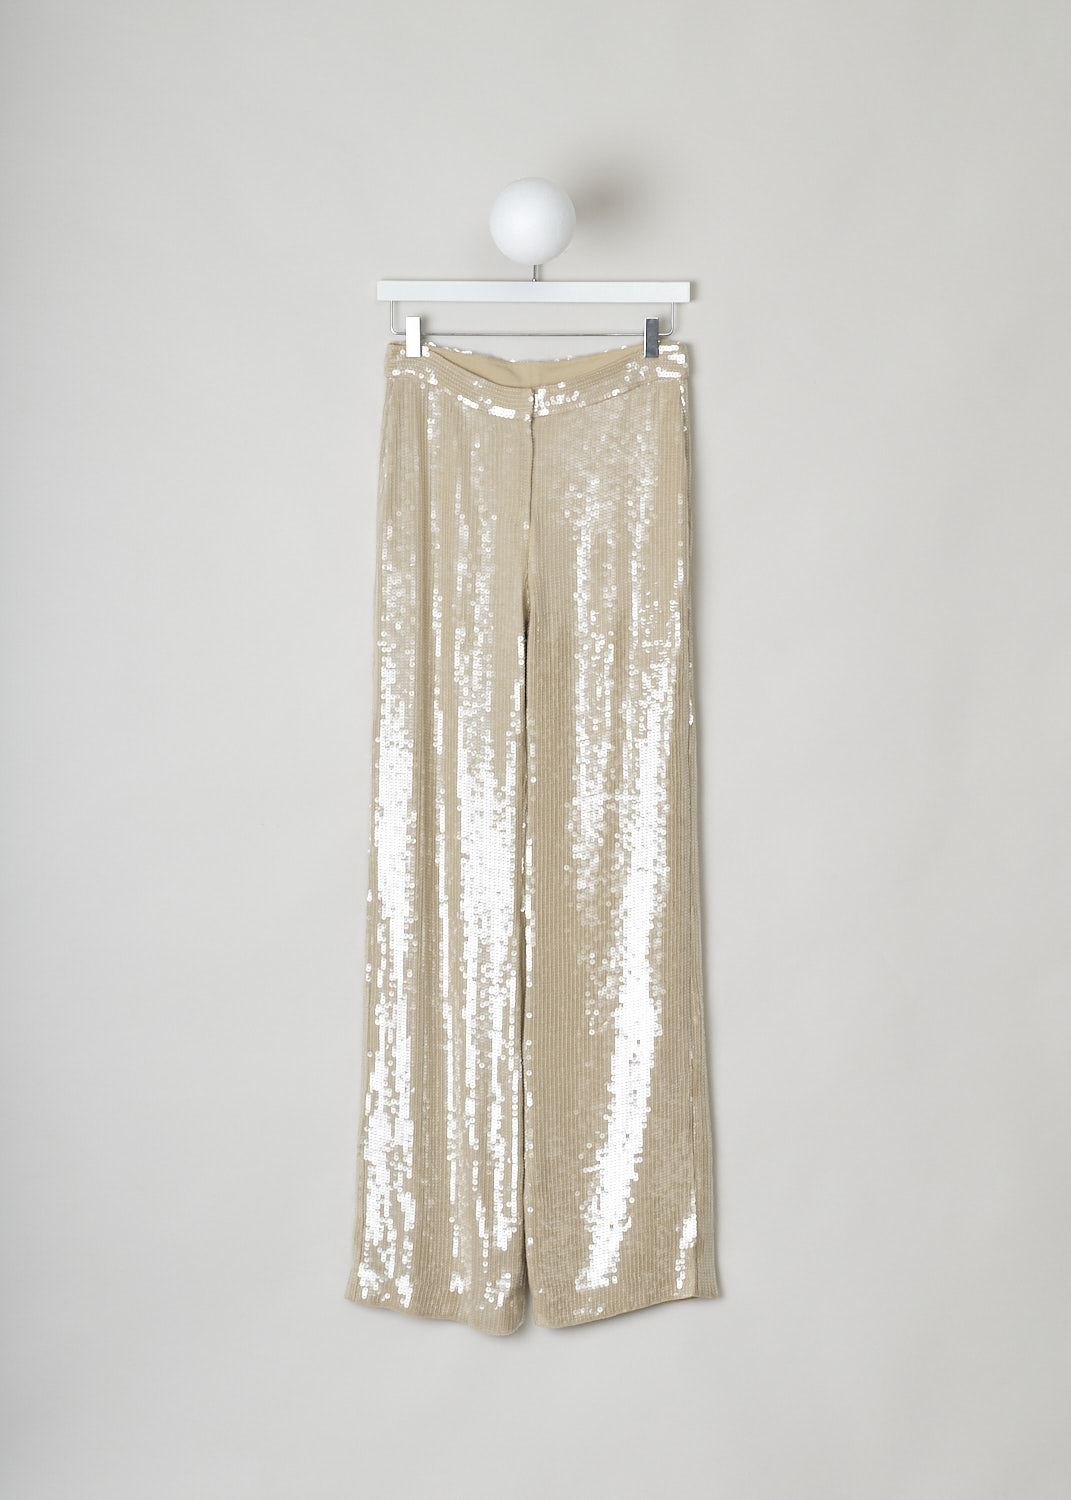 NILI LOTAN, KHAKI COLORED SEQUIN PANTS, 12186_W688_KHAKI, Front, Beige, These khaki colored pants are fully covered with see-through sequin. A concealed clasp and zip functions as the closure option. These pants have straight pant legs and are fully lined. 
